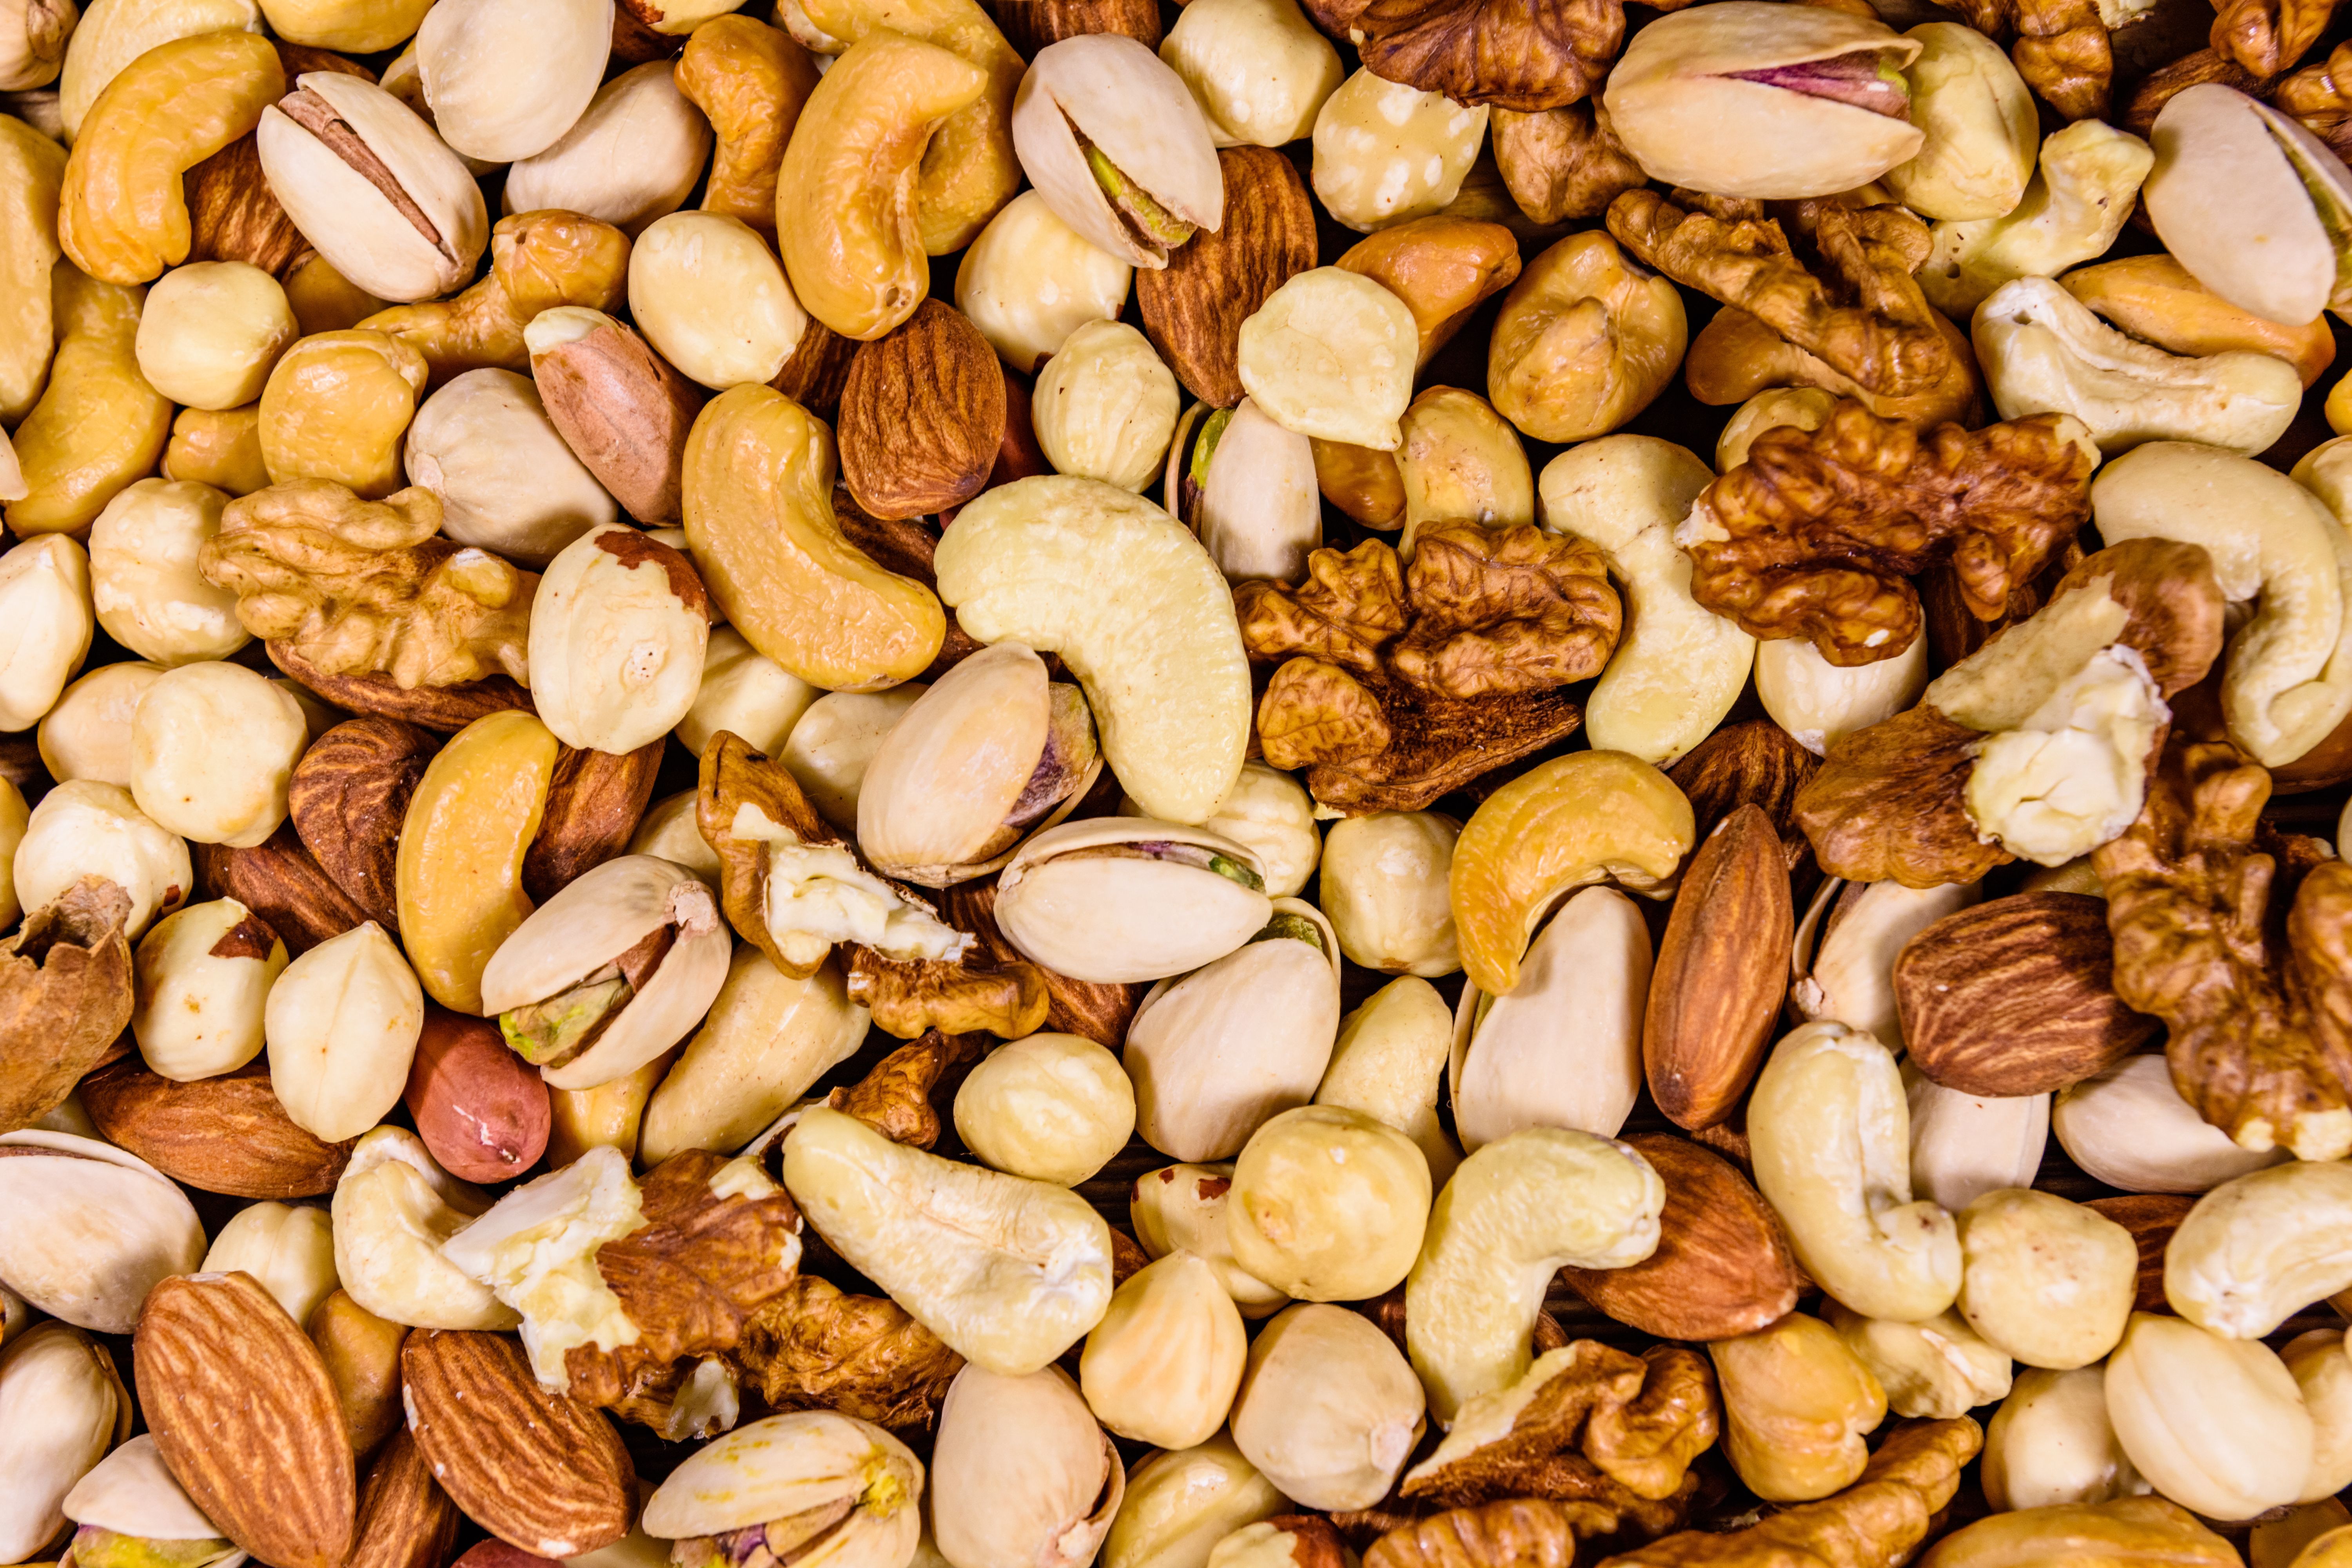 Background image of mixed nuts